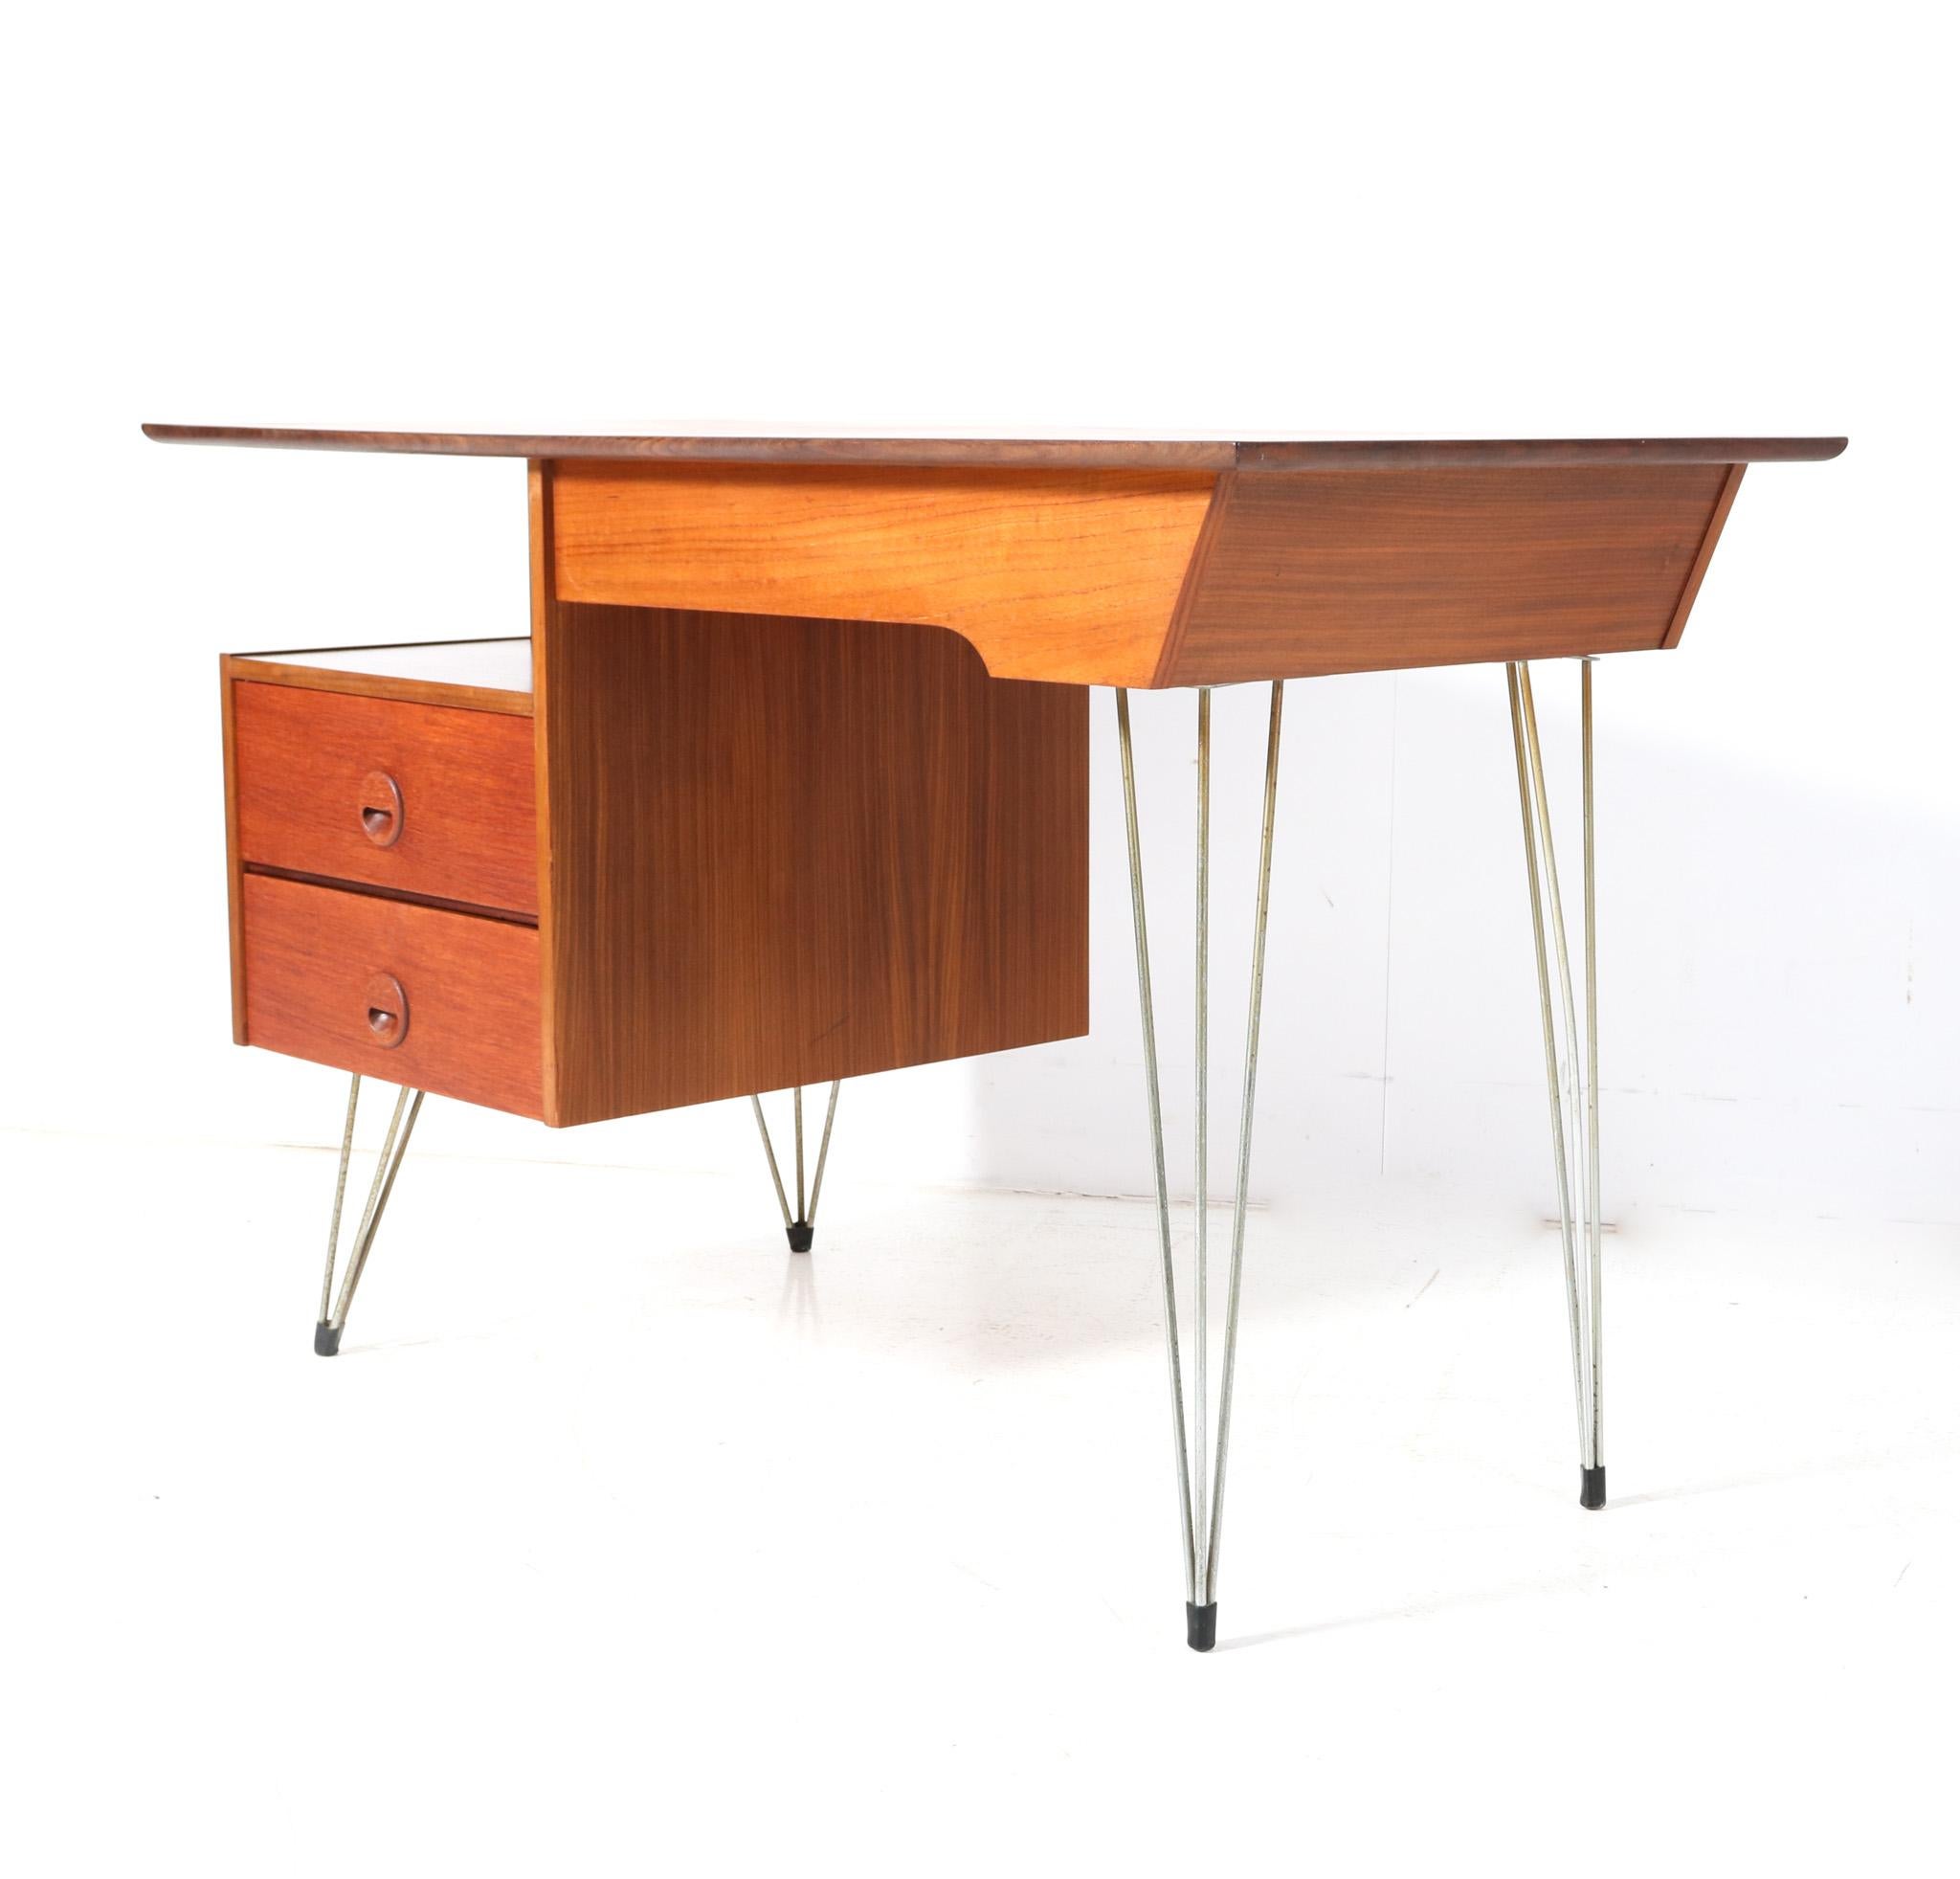 Teak Mid-Century Modern Desk or Writing Table by Louis van Teeffelen for WéBé In Good Condition For Sale In Amsterdam, NL